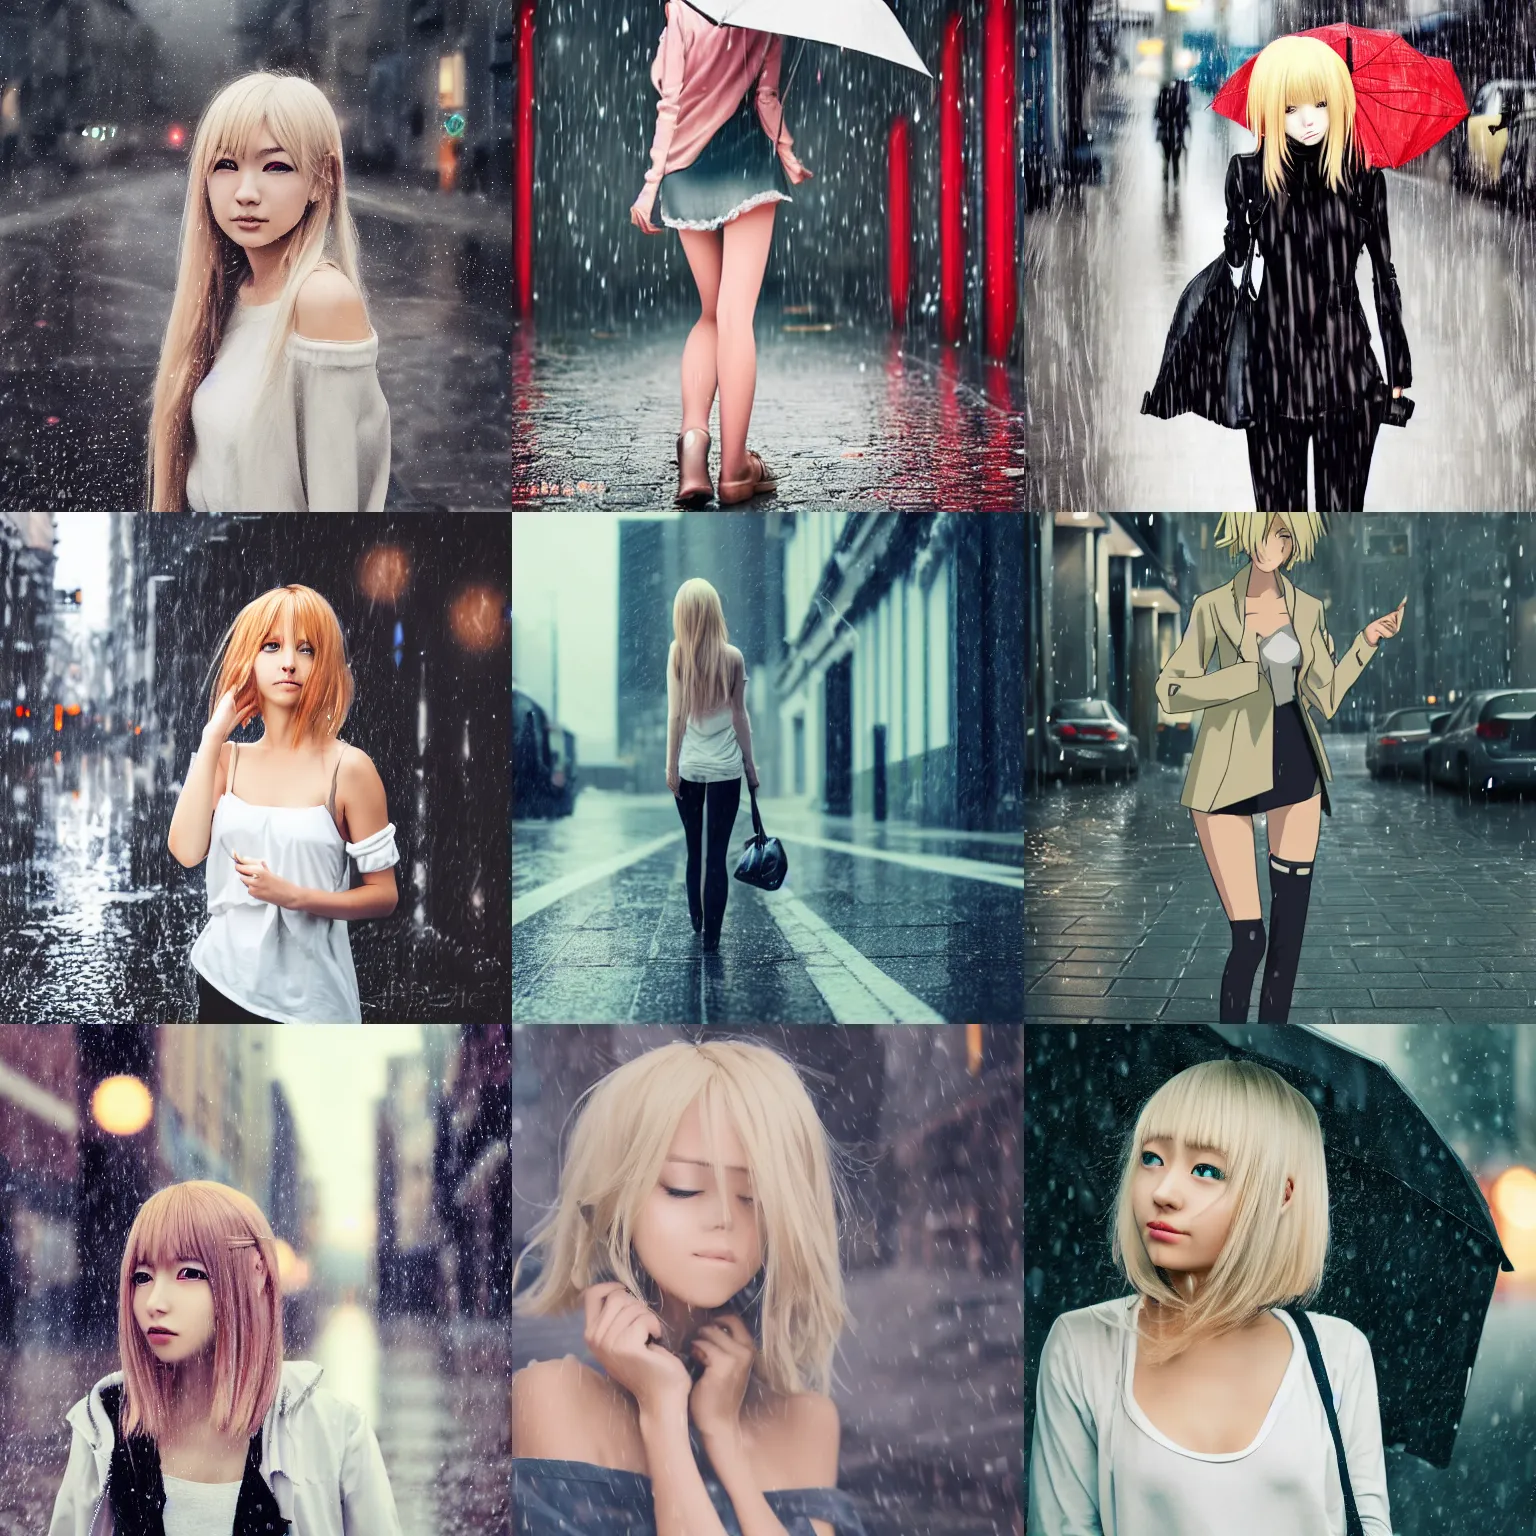 Prompt: high quality anime-style image of an attractive woman, light blonde shoulder-length hair, rainy urban streets, 4k